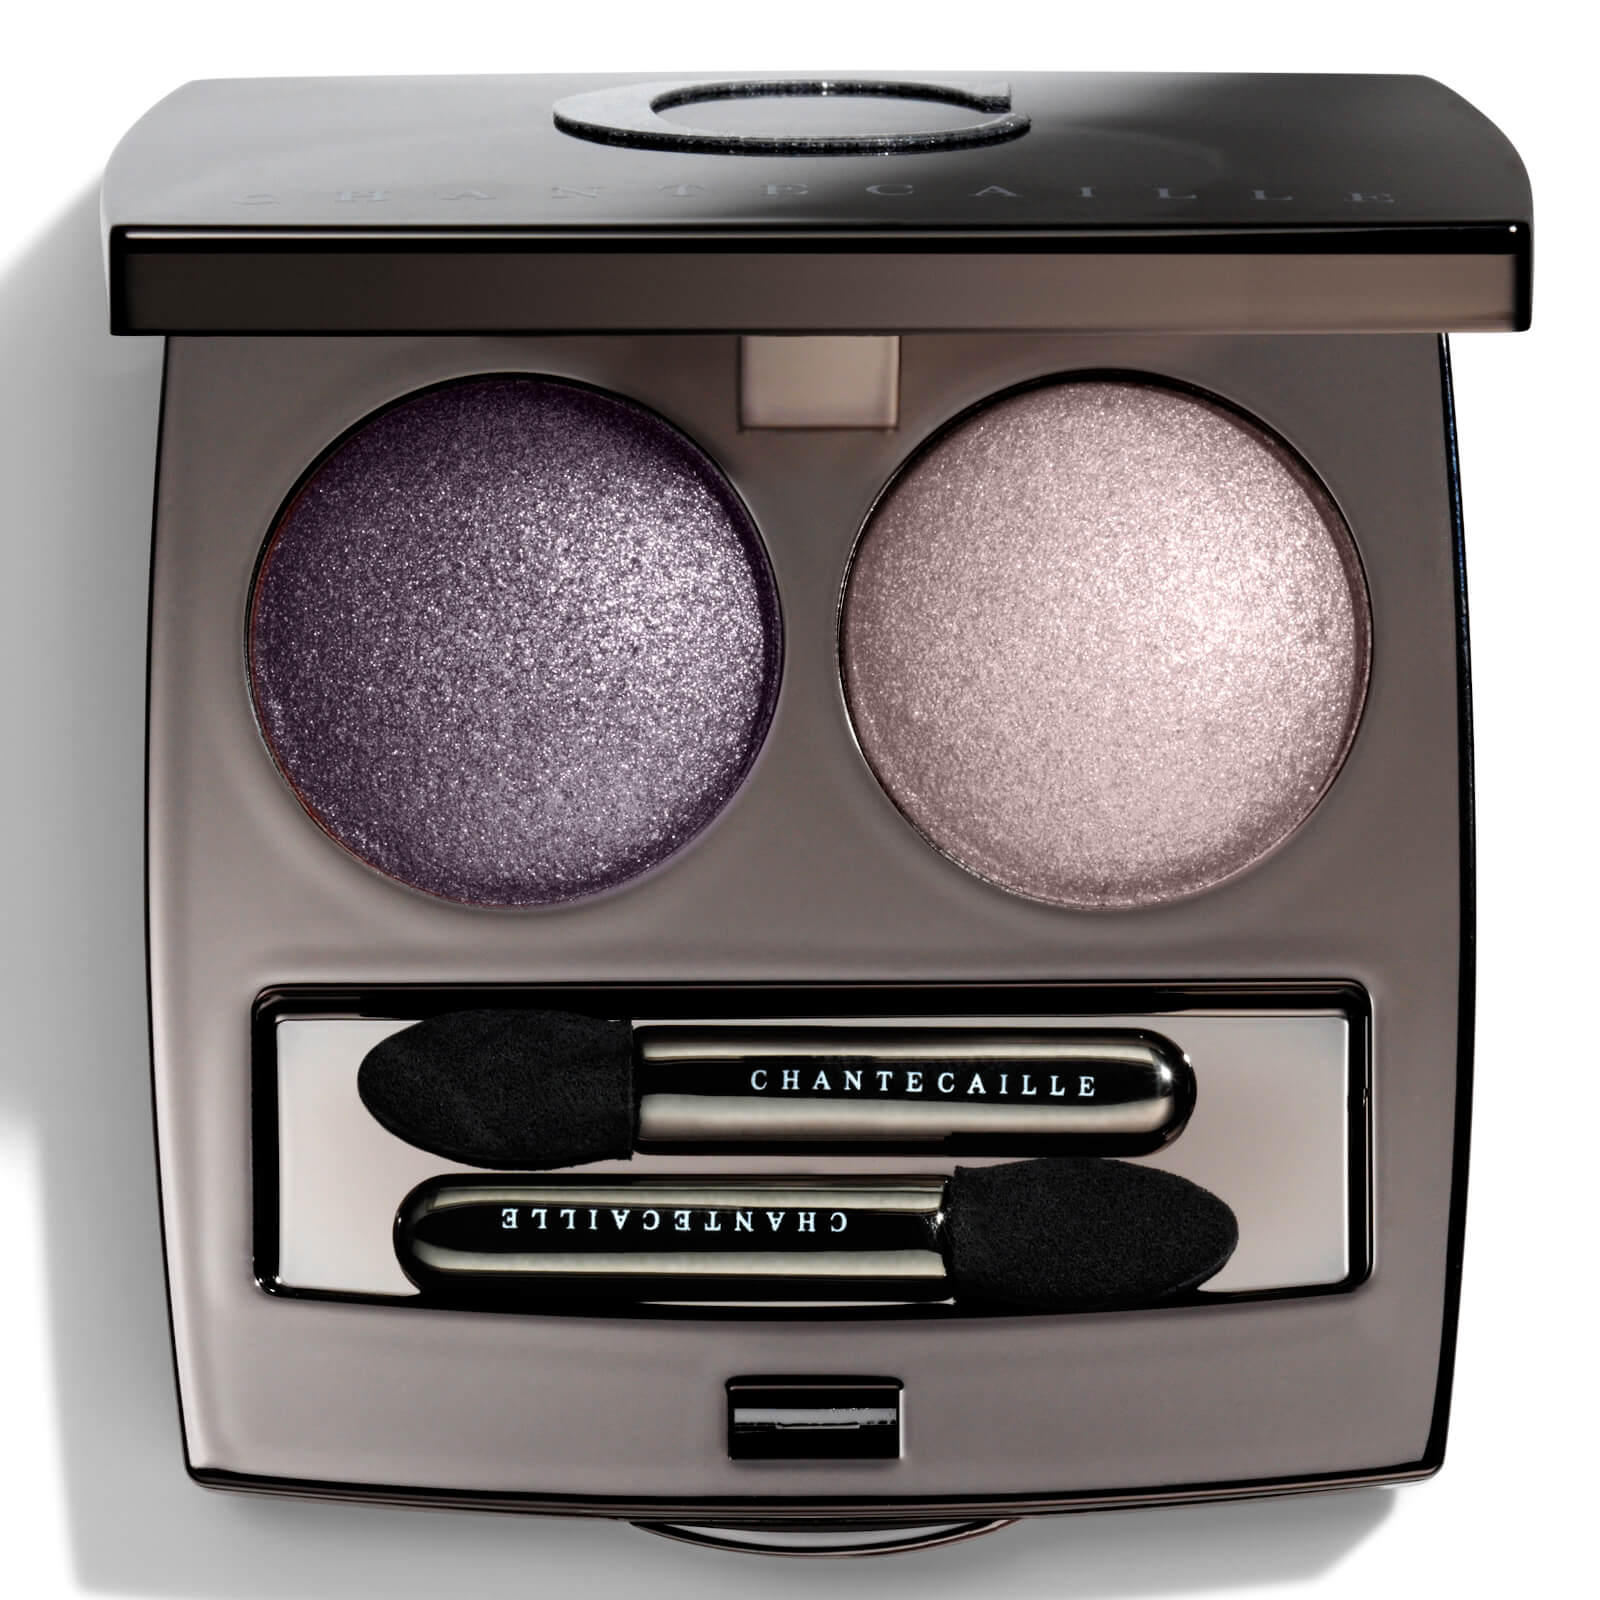 Chantecaille Le Chrome Luxe Eye Duo 4g (Various Shades) – Pigeon and Marble lookfantastic.com imagine